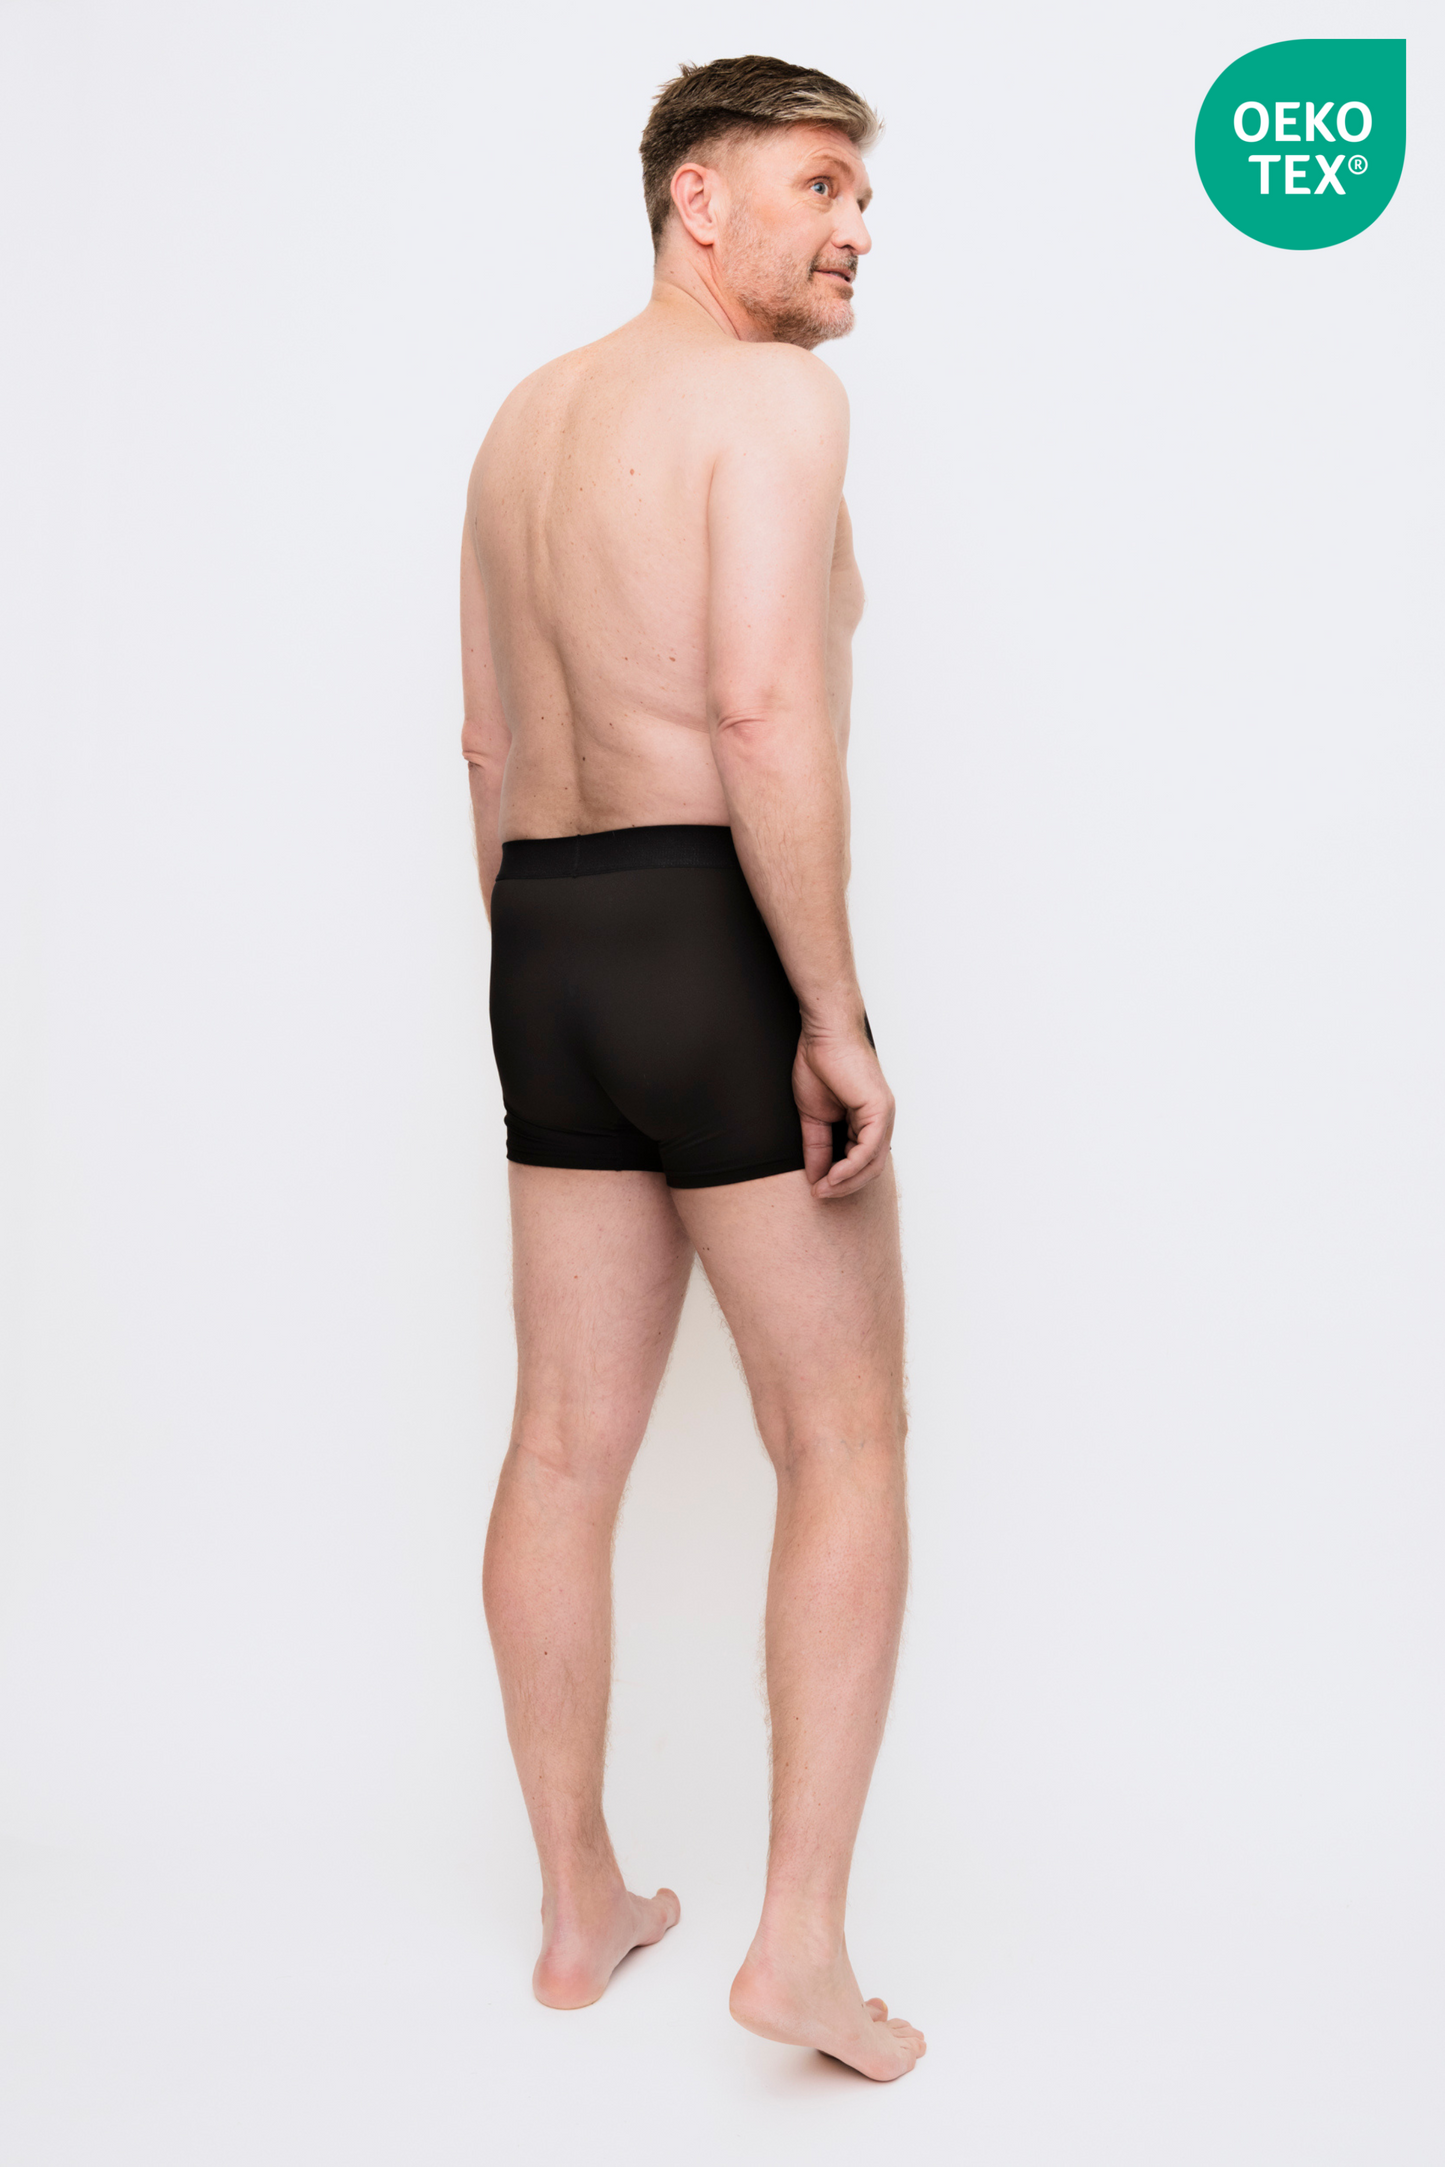 Ultra light Boxers - urinary incontinence boxer shorts